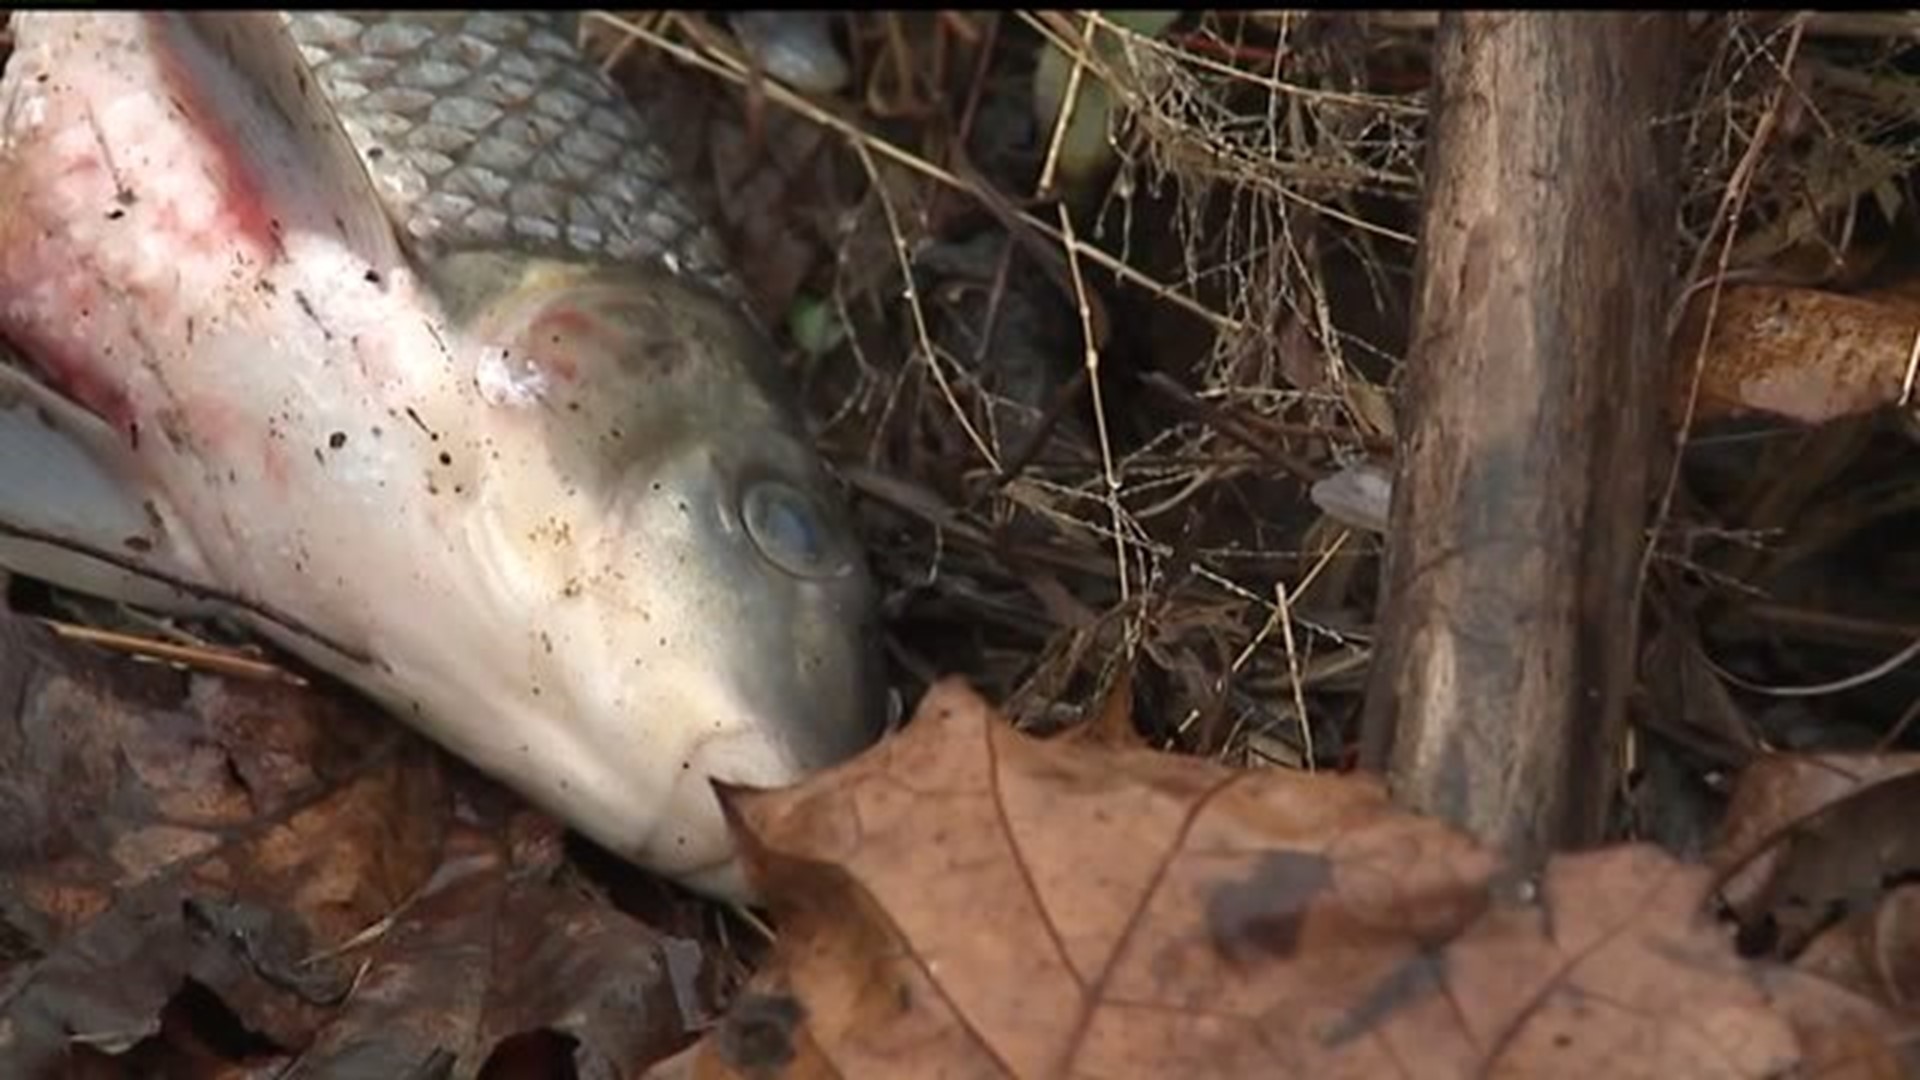 EPA officials are looking into what caused multiple fish in the Susquehanna River to die